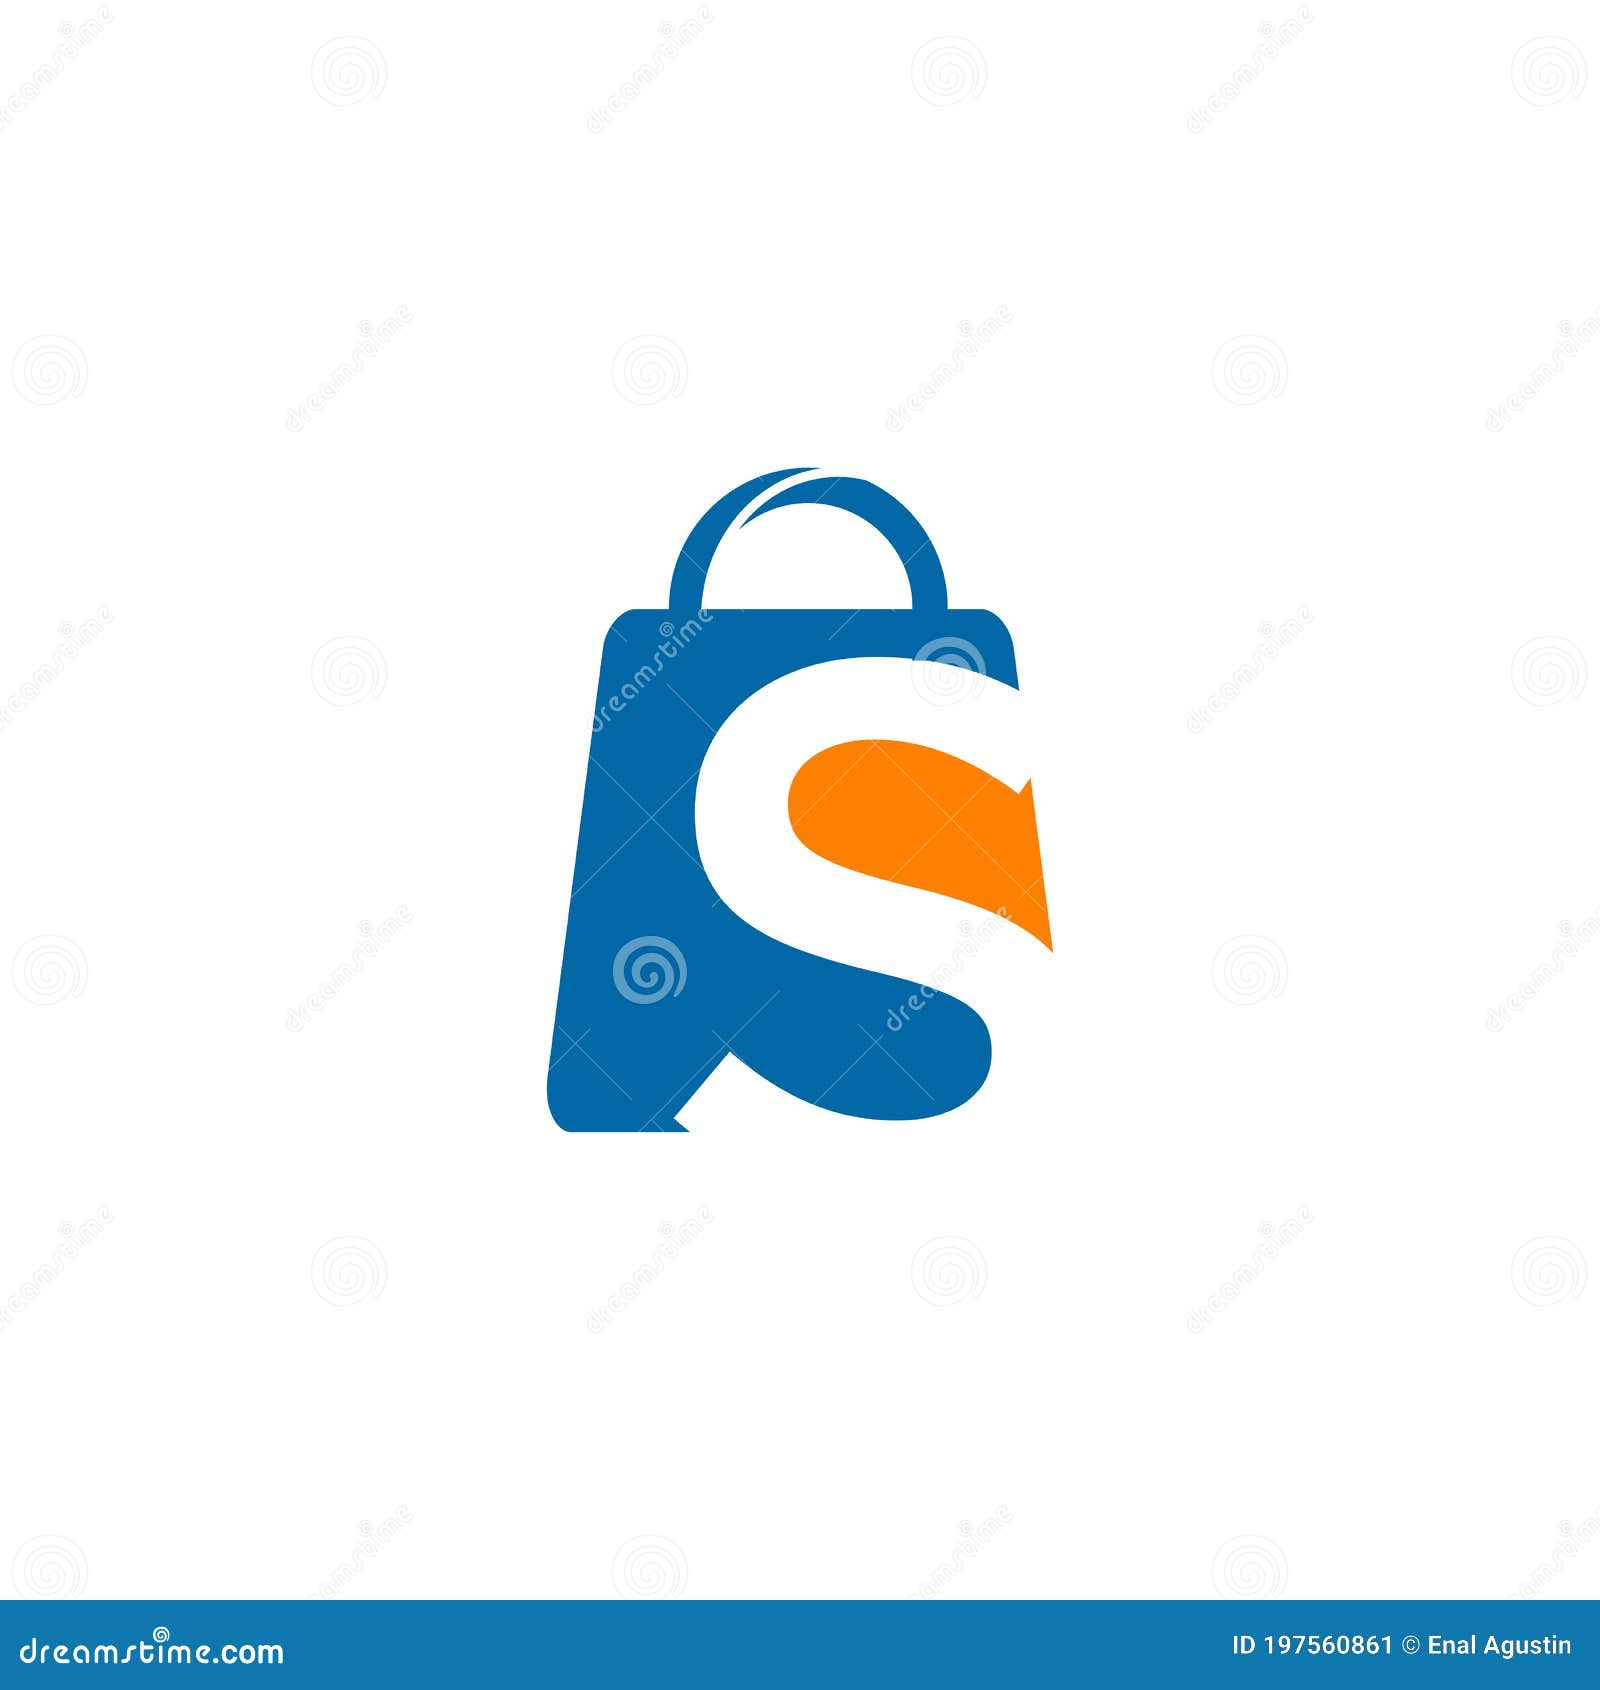 Shopping Bag Logo Incorporated with S Letter Design Stock Vector ...